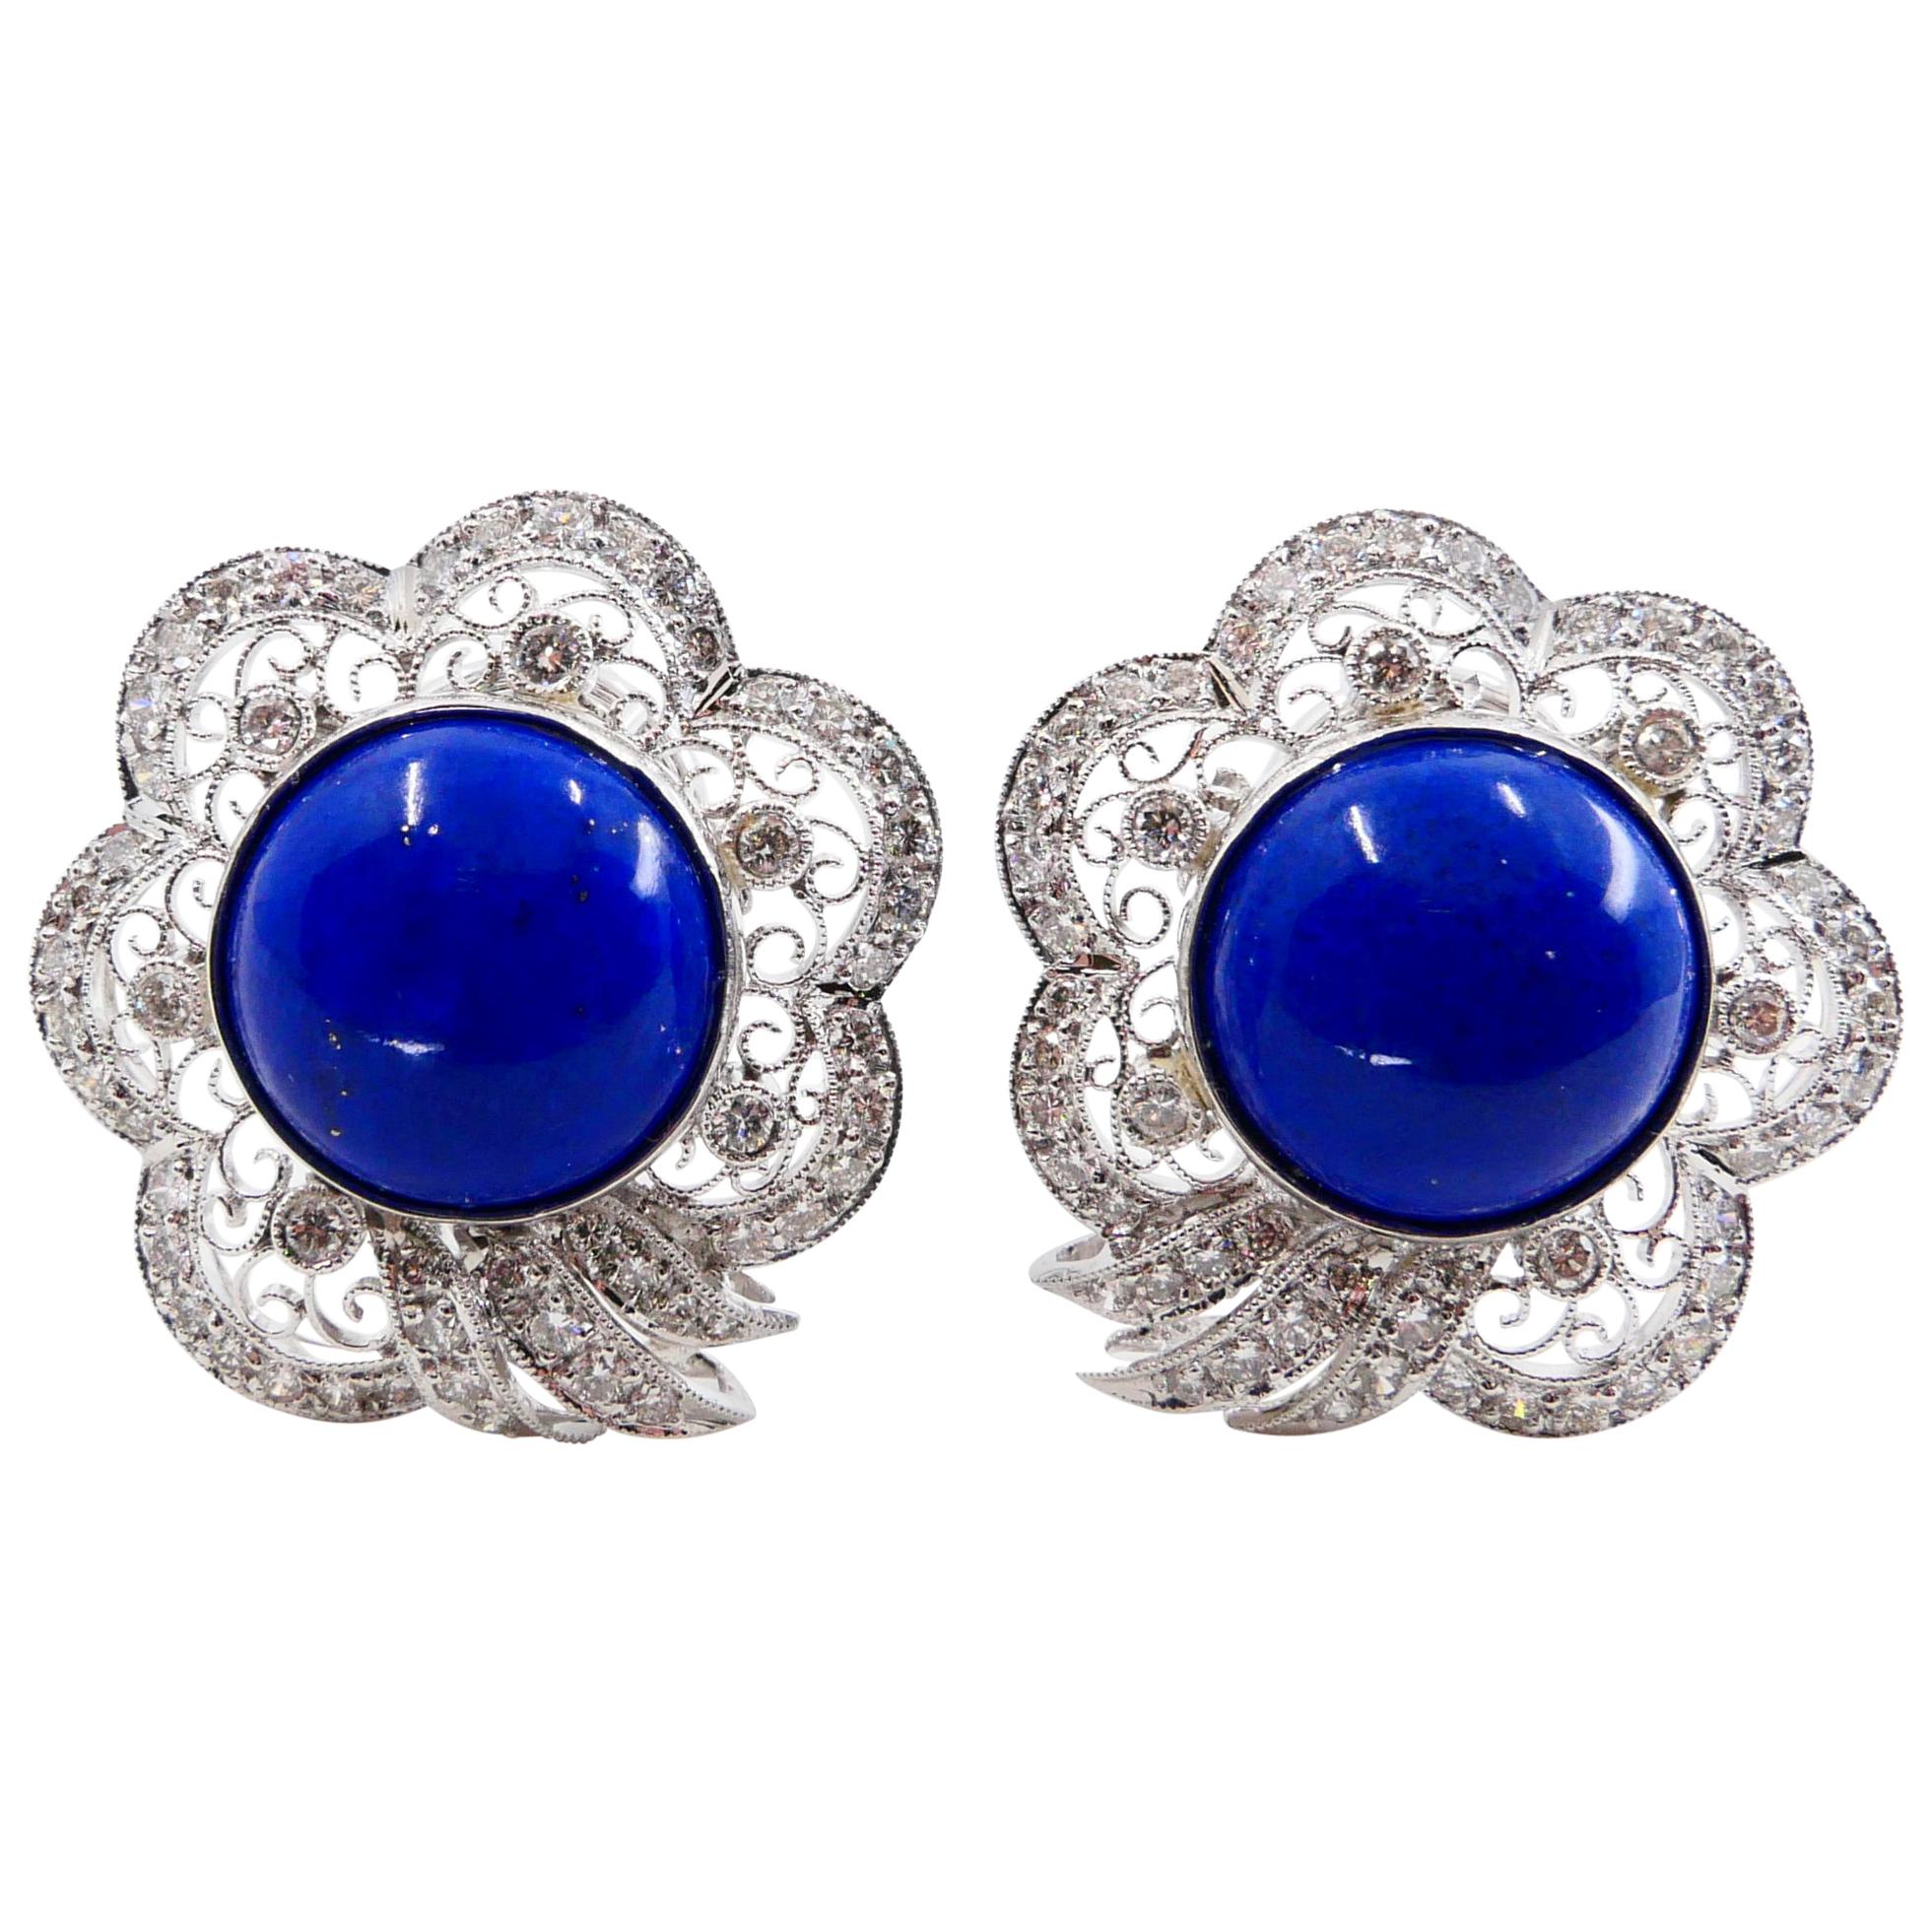 Royal Blue Lapis Lazuli And Diamond Earrings With Natural Gold Veins & Spots For Sale 1